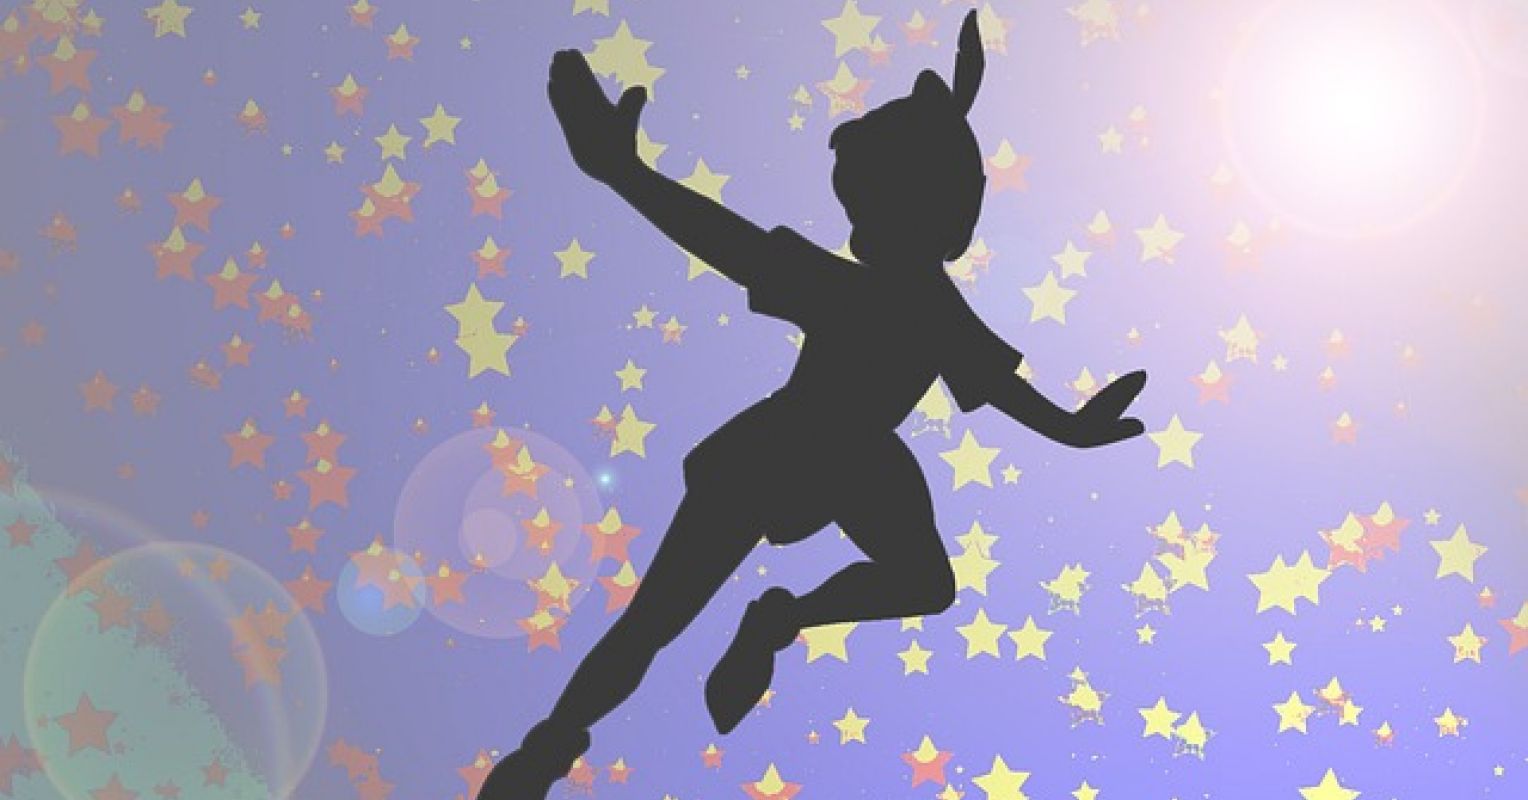 Do All Guys Suffer From Peter Pan Syndrome When It Comes To Their Clothes?